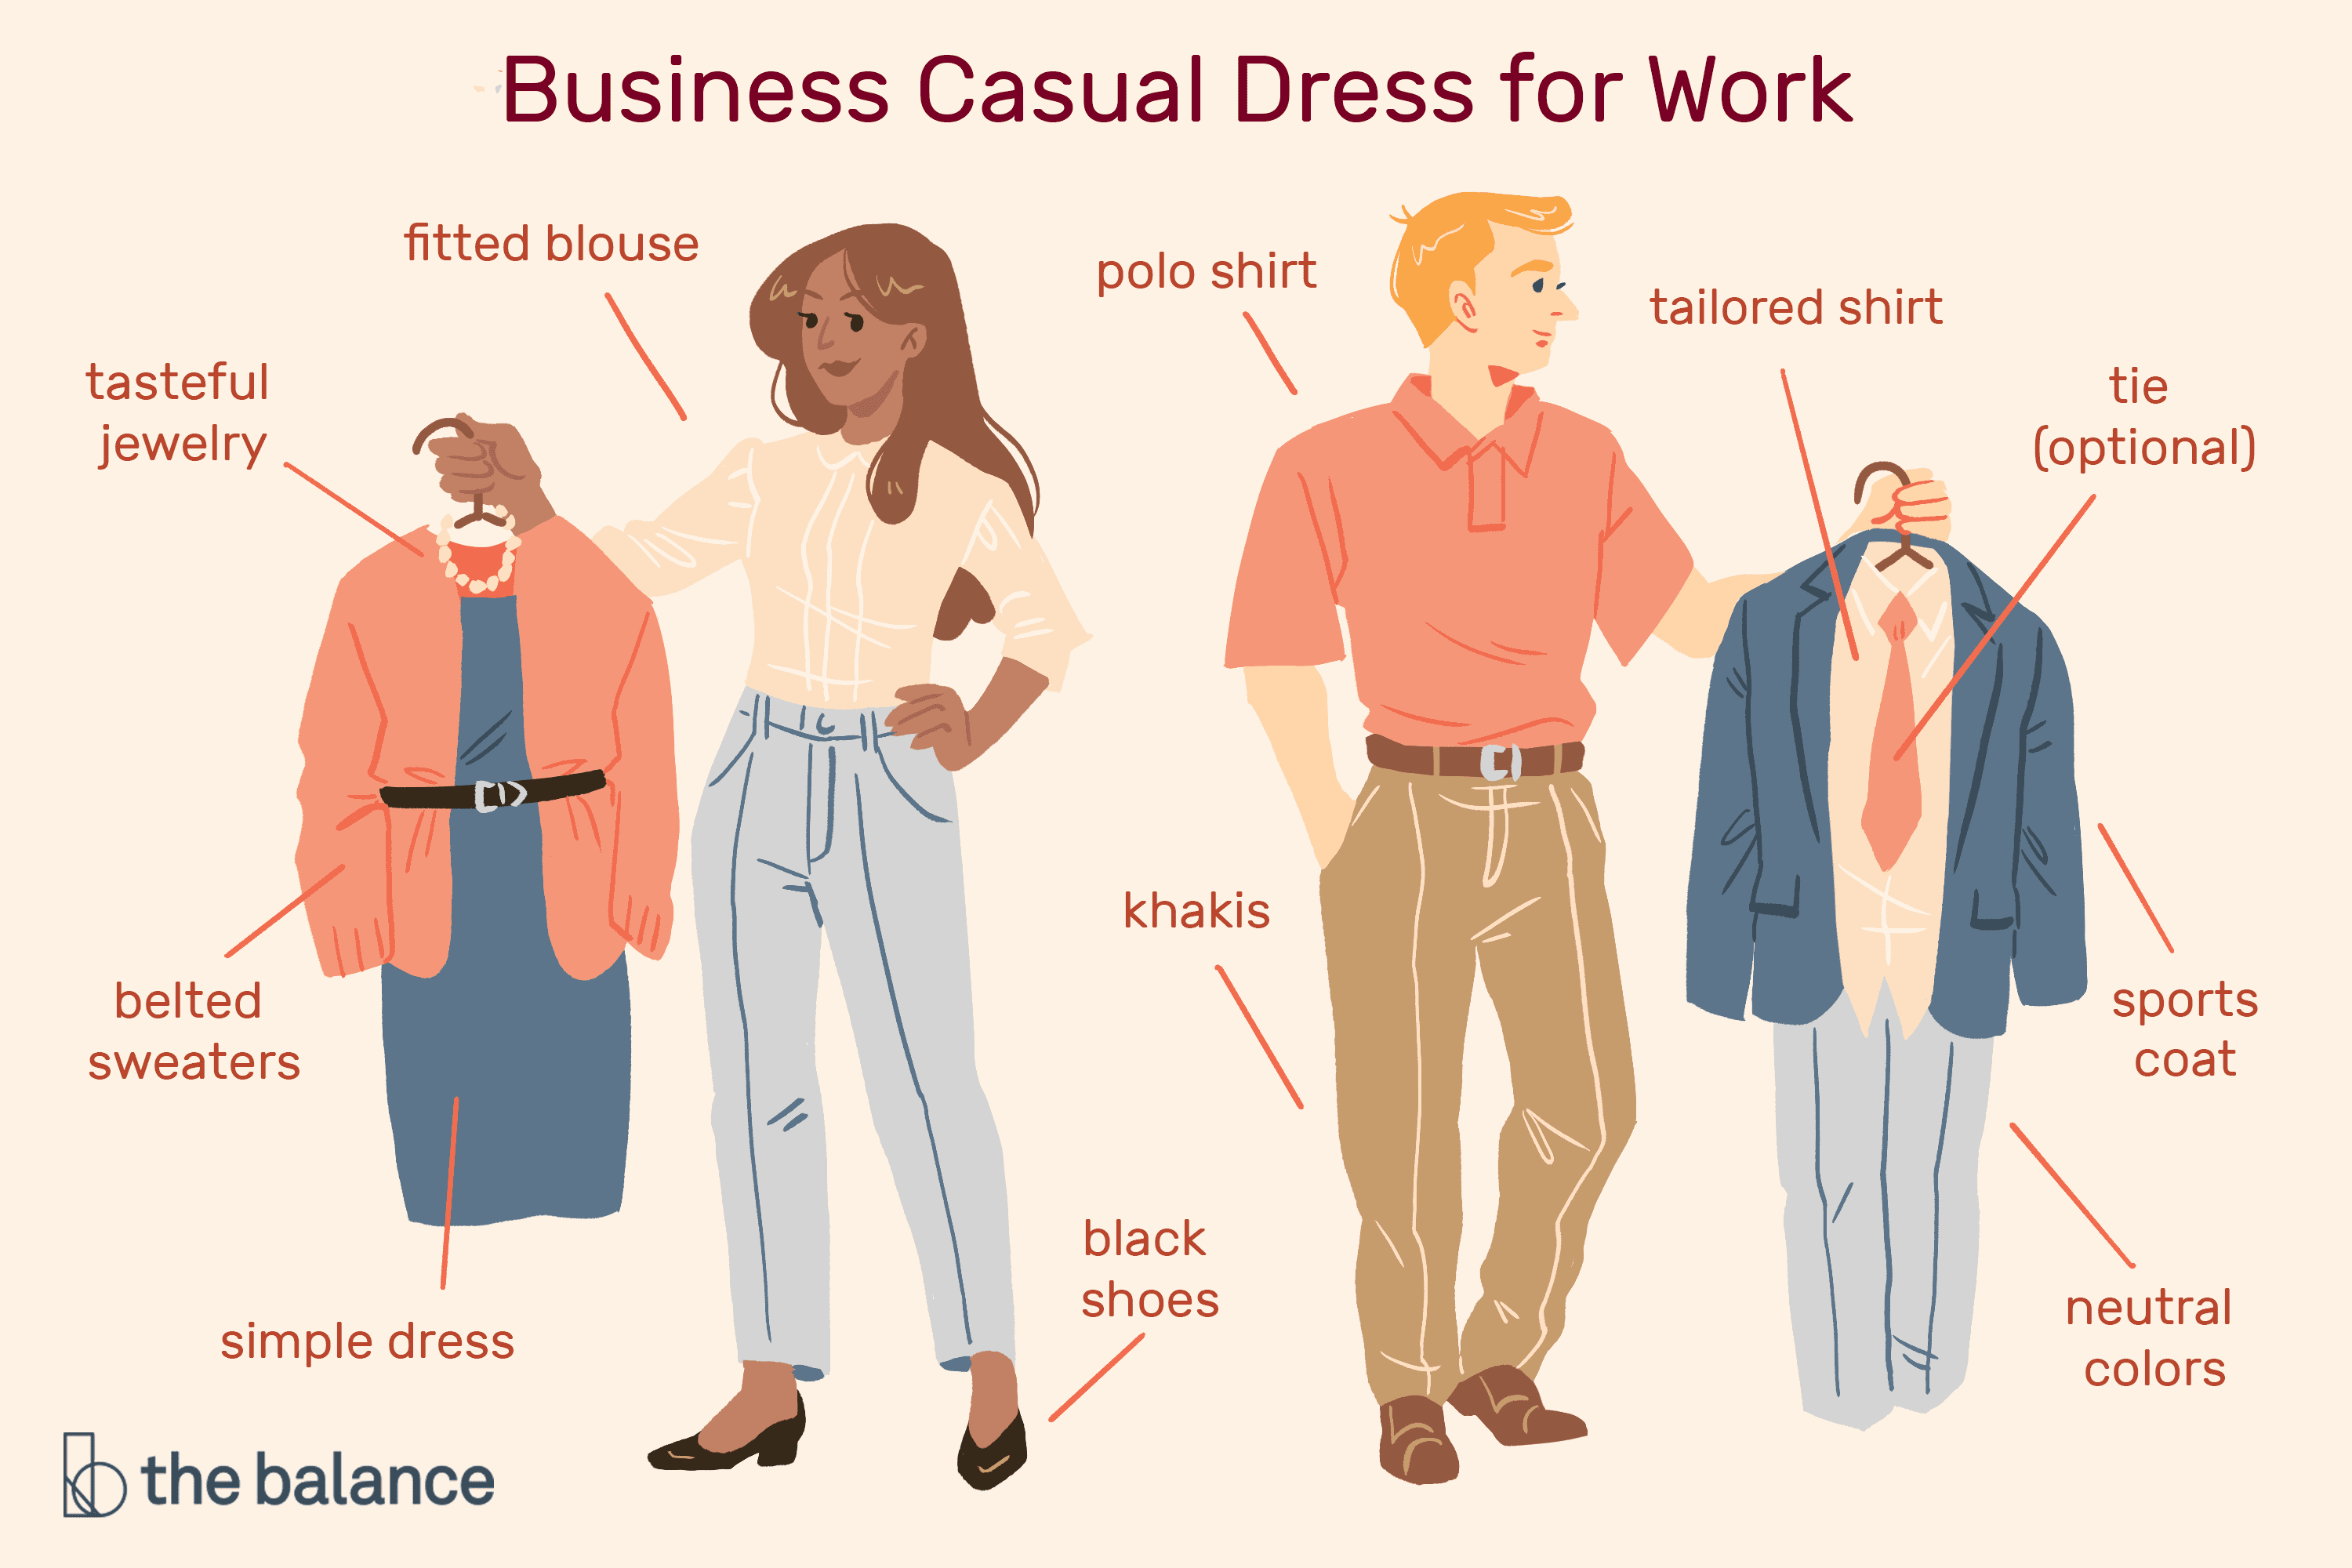 image of Business Casual Dress for the Workplace